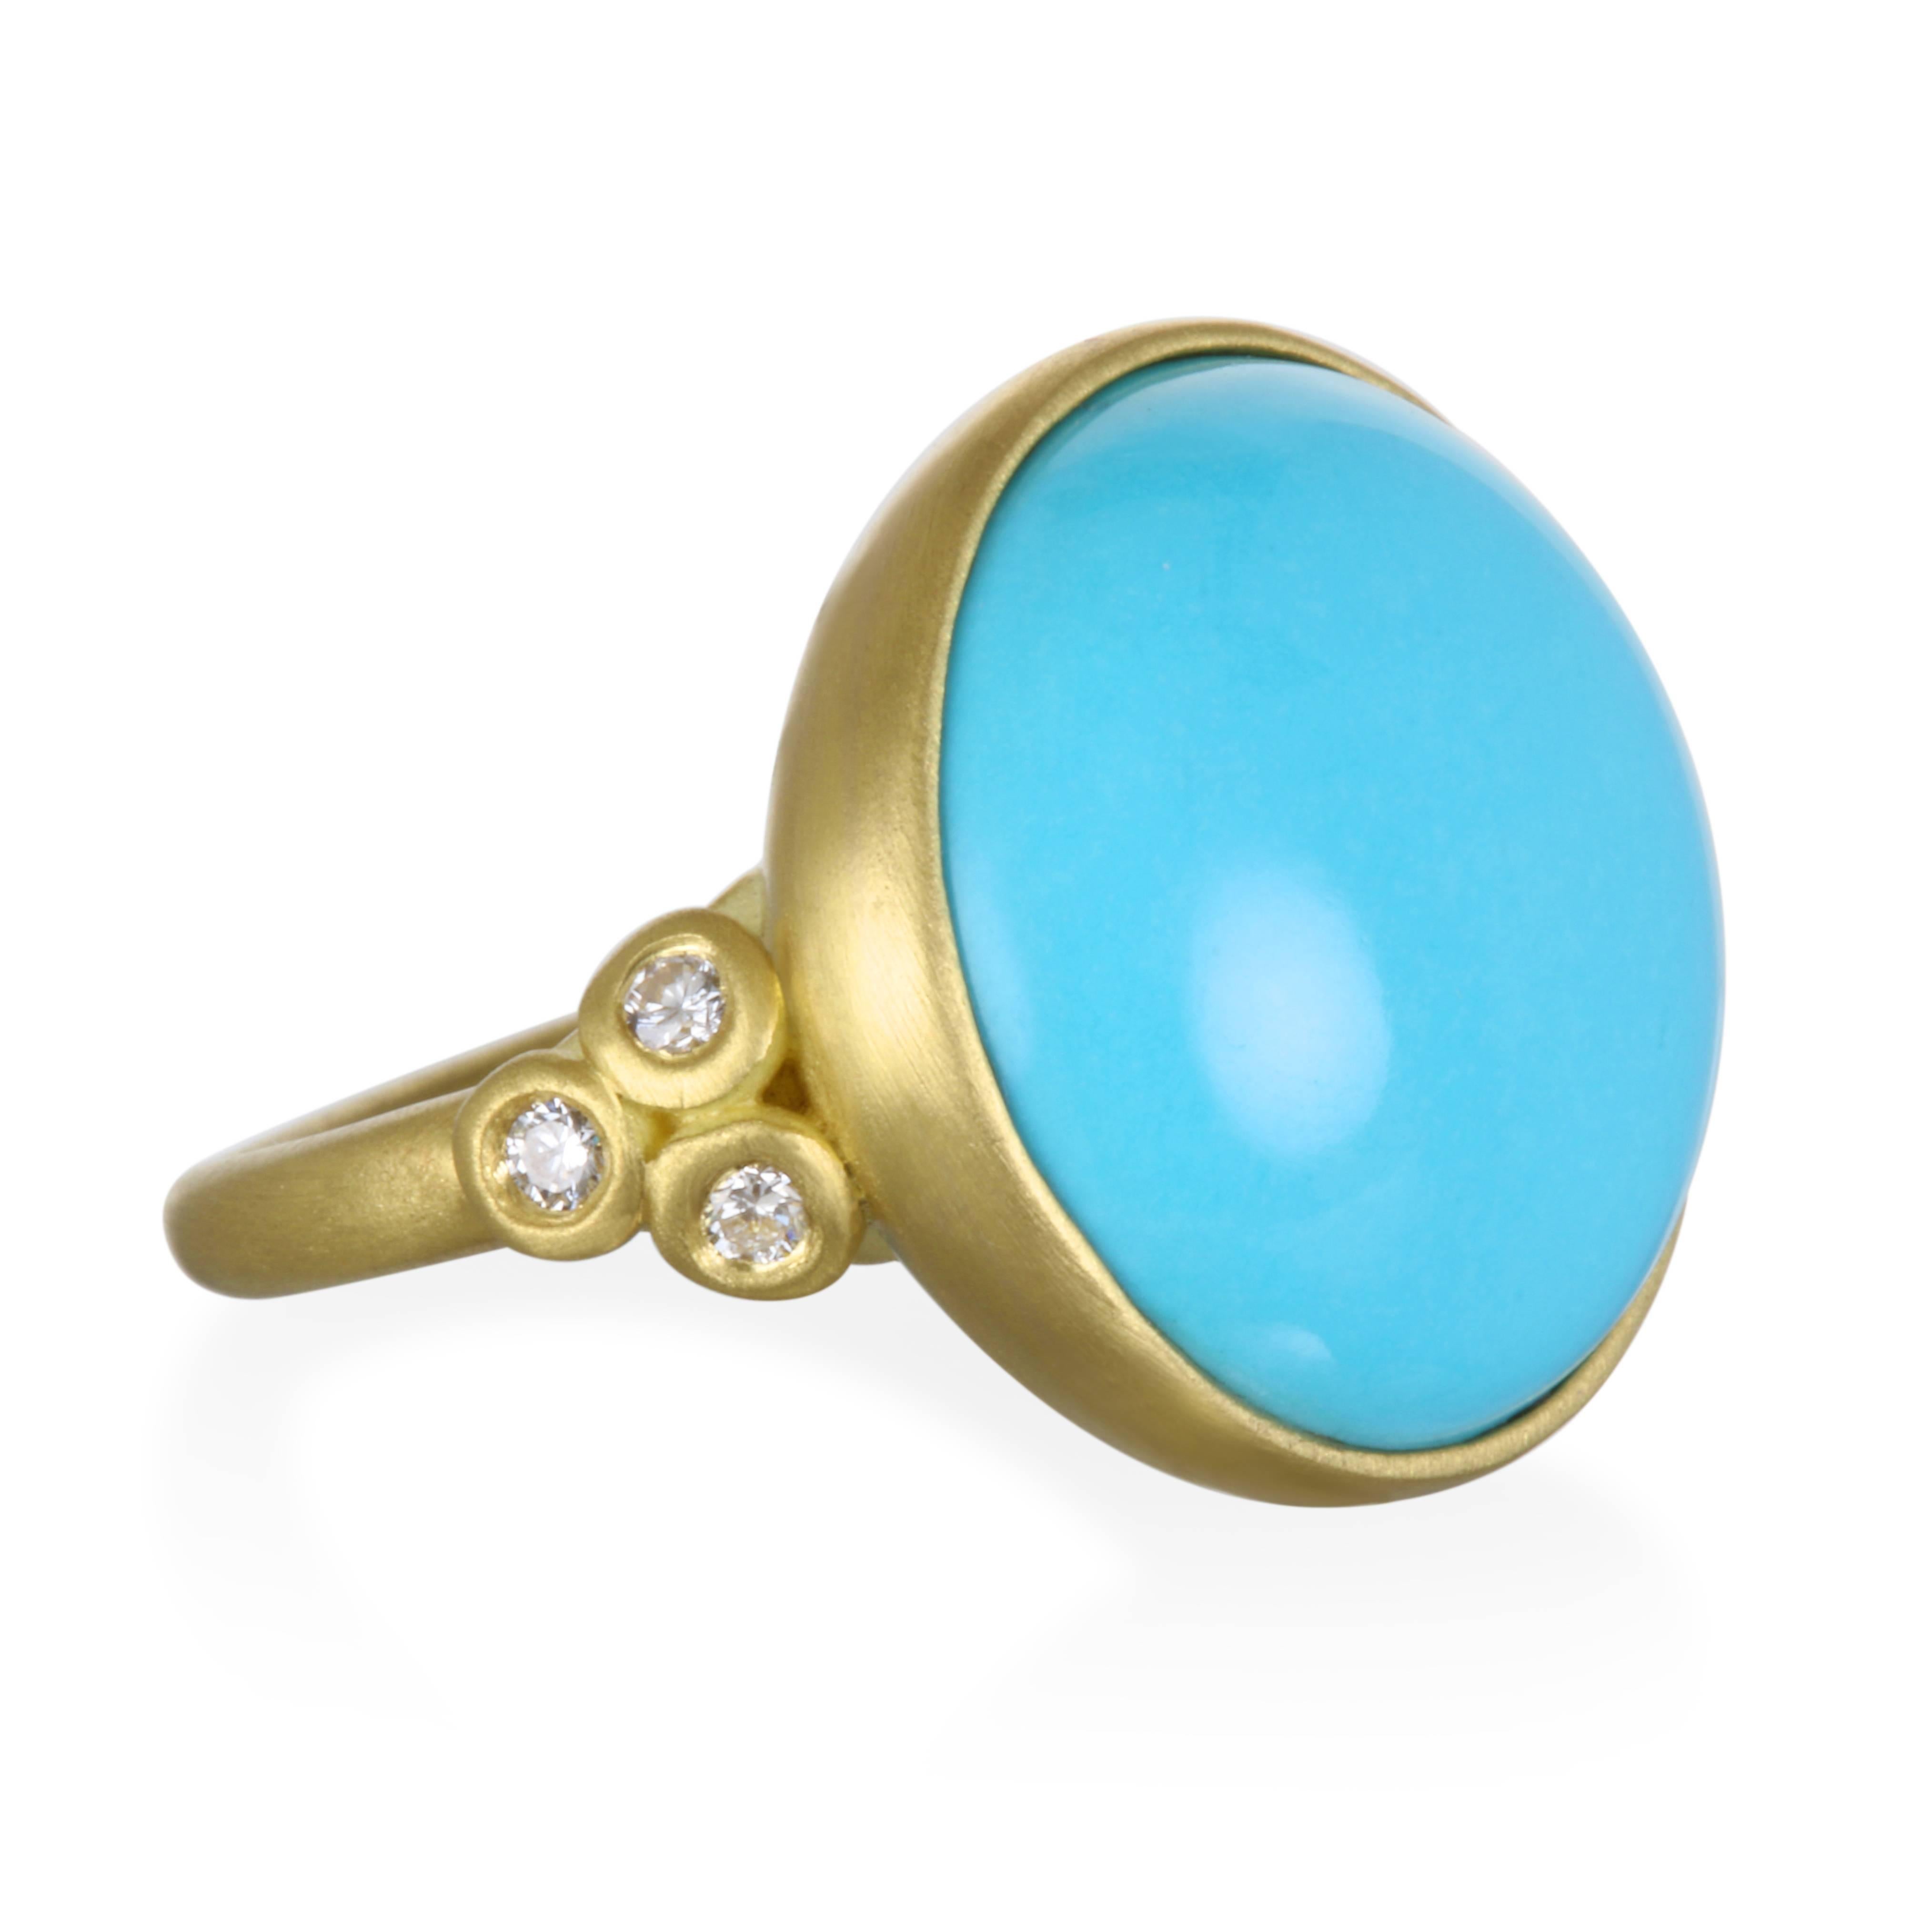 The classic combination of turquoise and gold in Faye Kim's 18k green gold ring is timeless.  Embellished with diamonds and bezel set in a clean, modern style,  the turquoise ring is eye-catching and beguiling-a definite stand-out!

Stone Info: